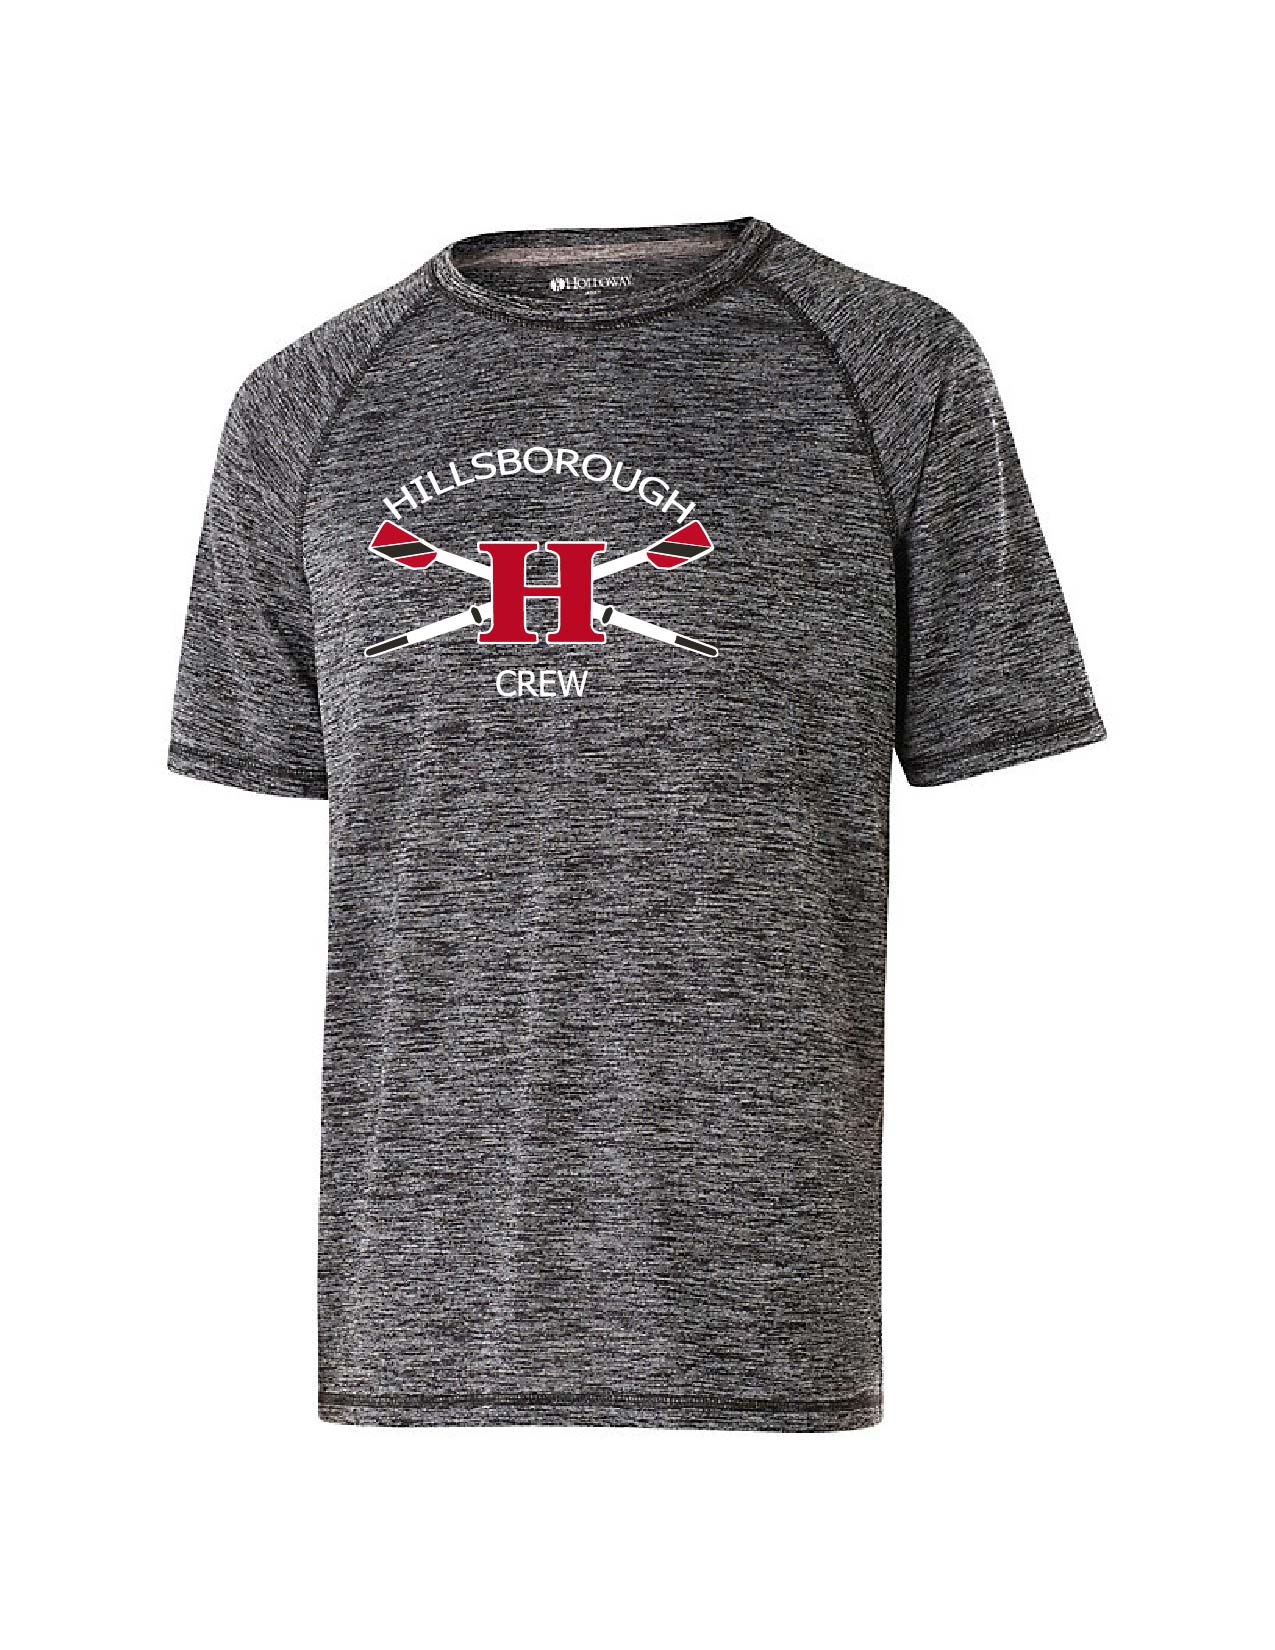 J - HHS Rowing Electrify Dri Fit Tee